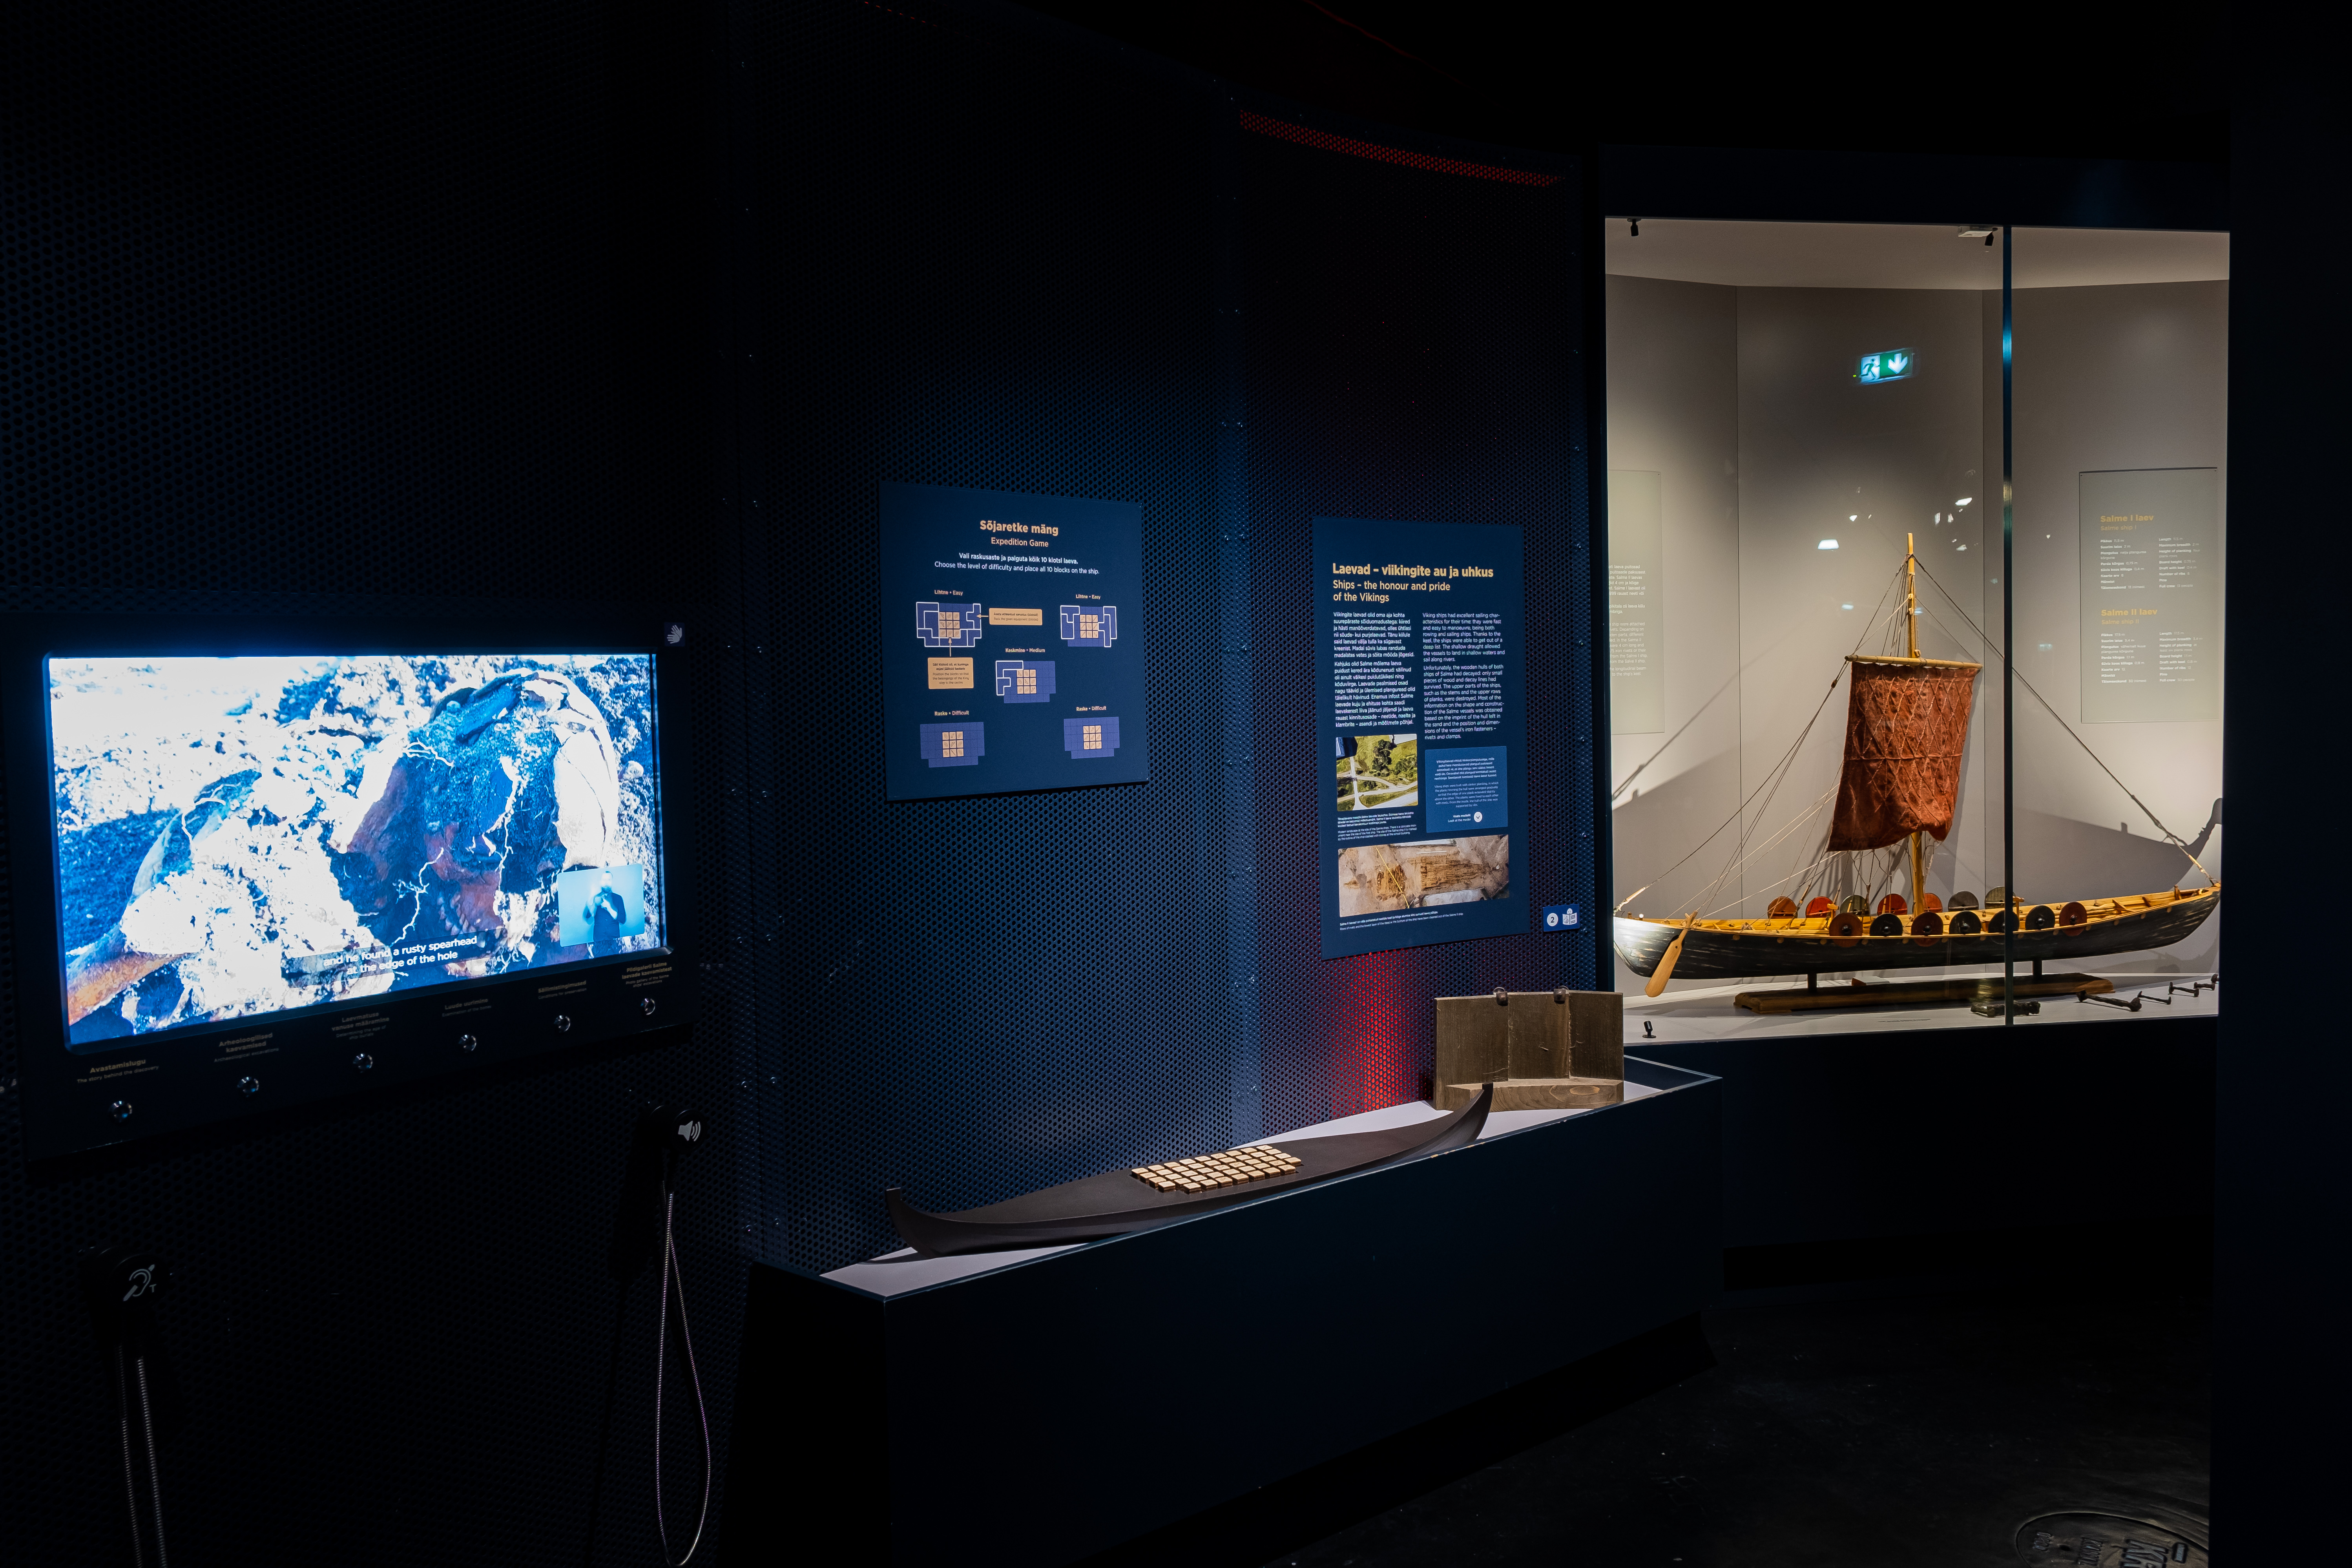 Travelling exhibition “Vikings before Vikings“ - design and manufacture by Motor.